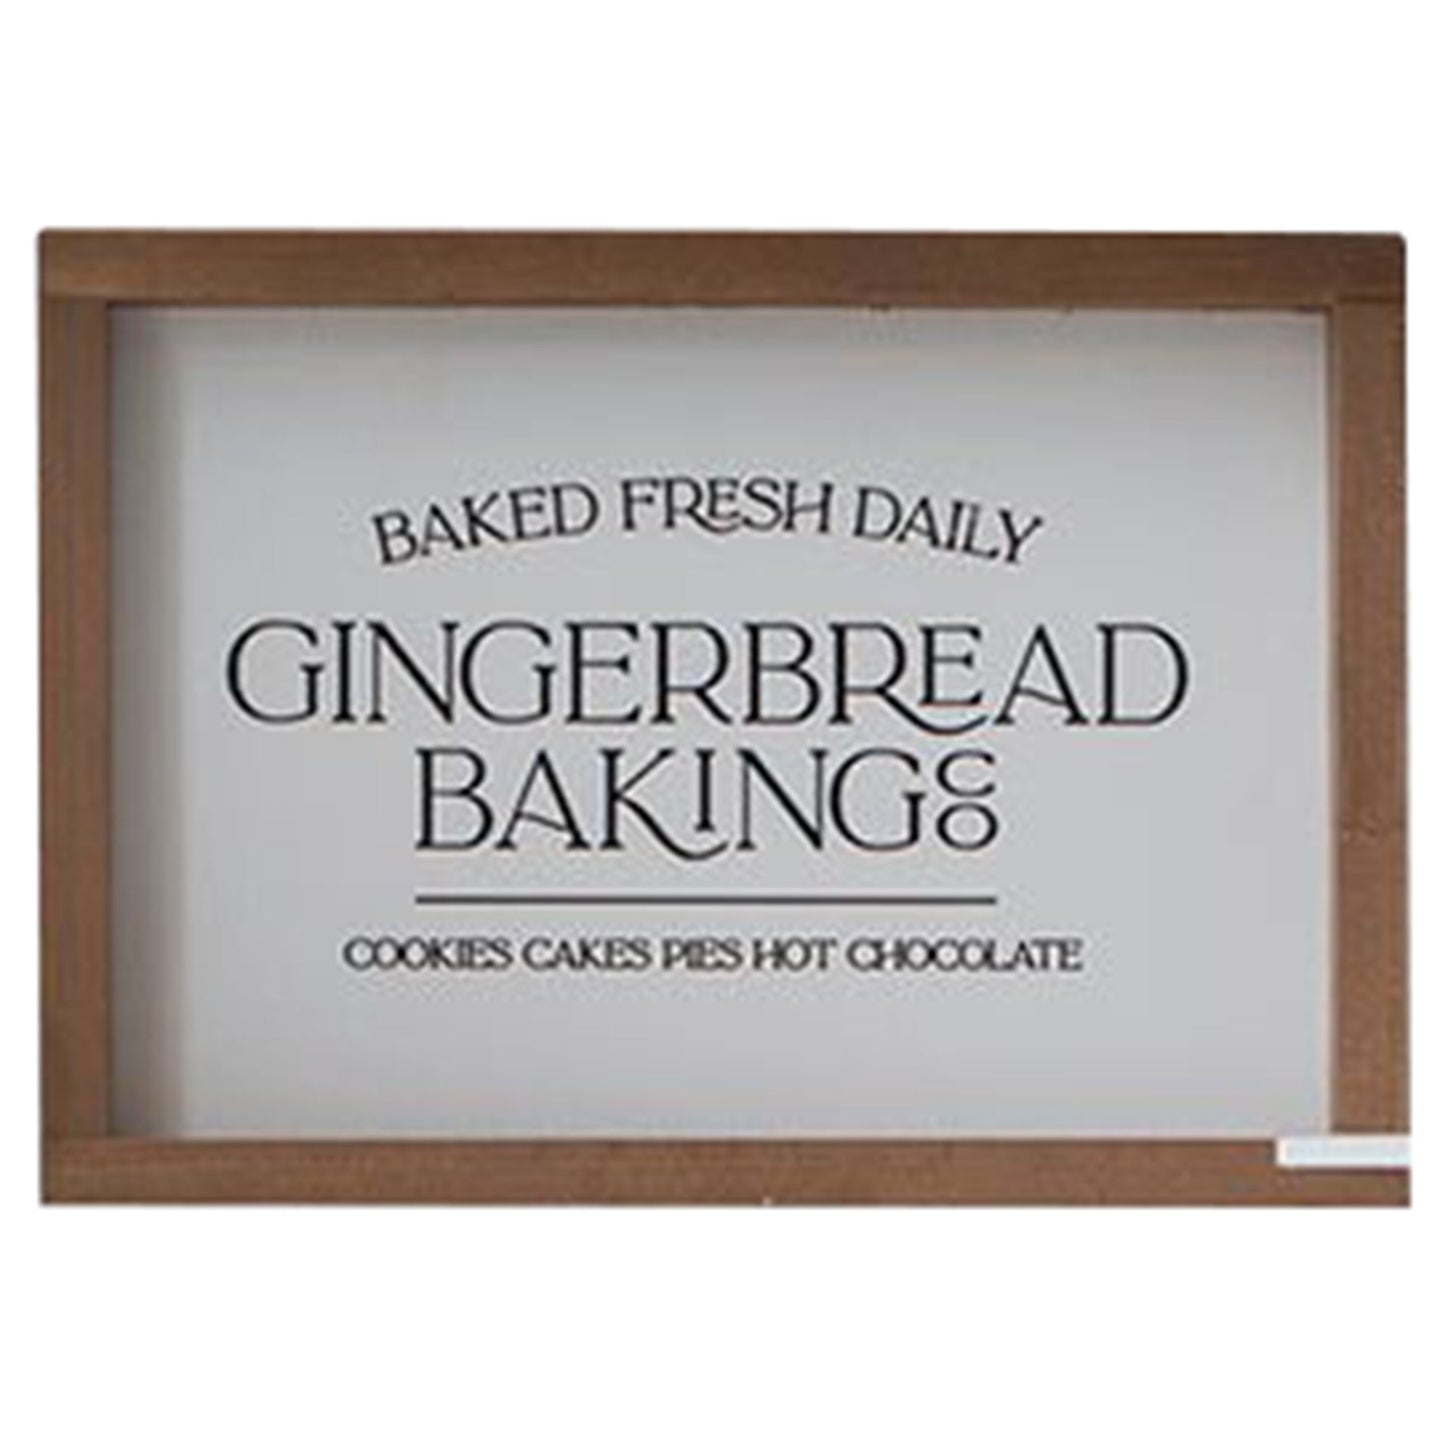 Gingerbread Baking Co. Wall Decoration - White & Faded